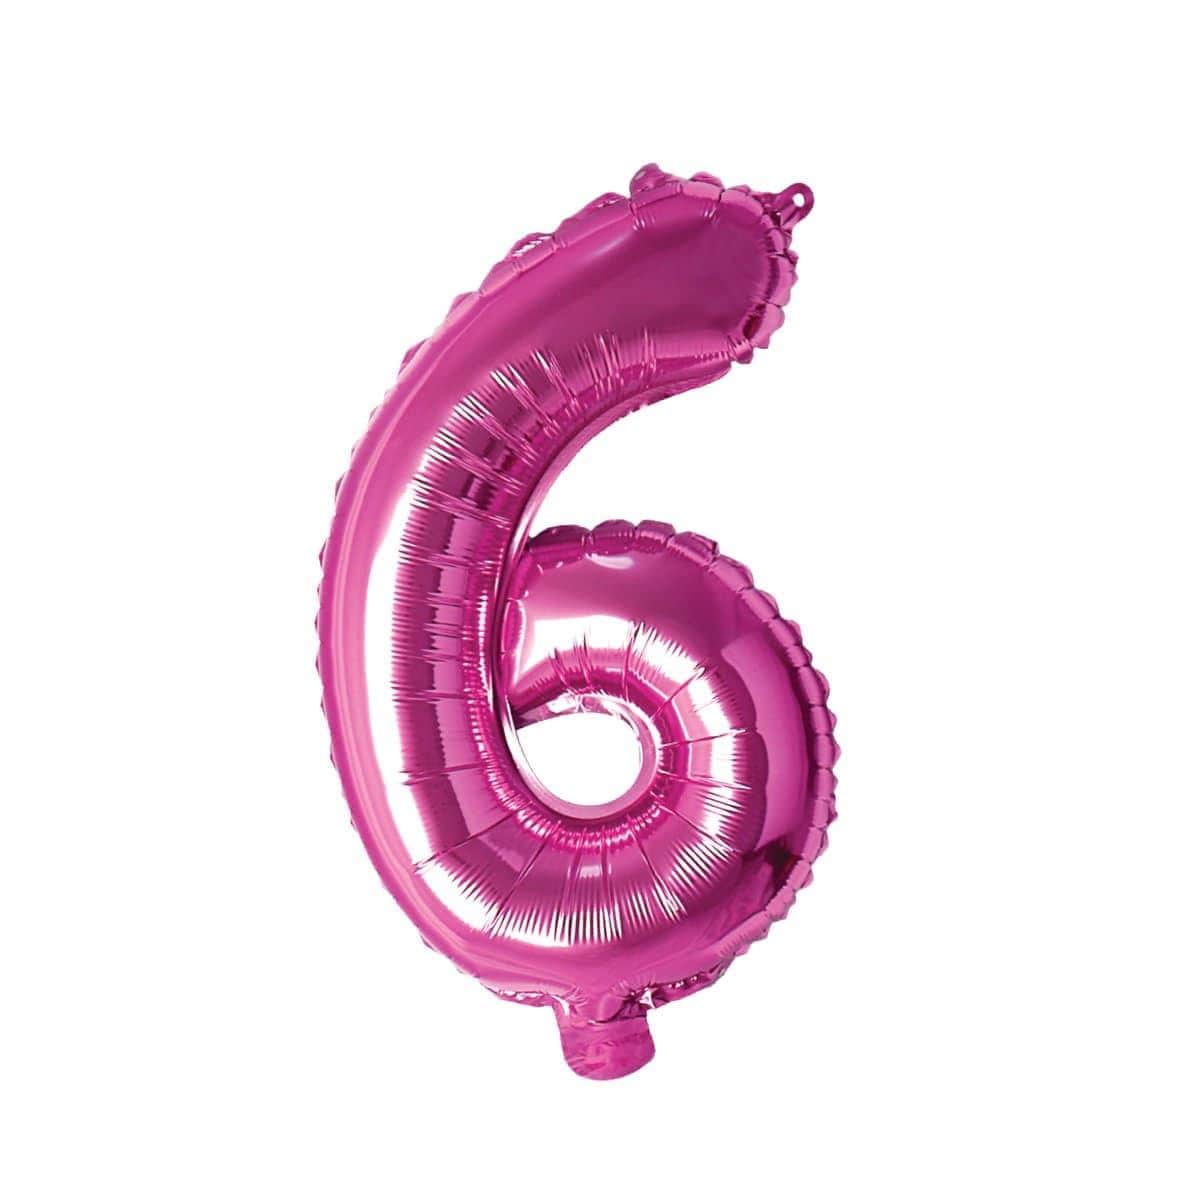 Buy Balloons Pink Number 6 Foil Balloon, 16 Inches sold at Party Expert